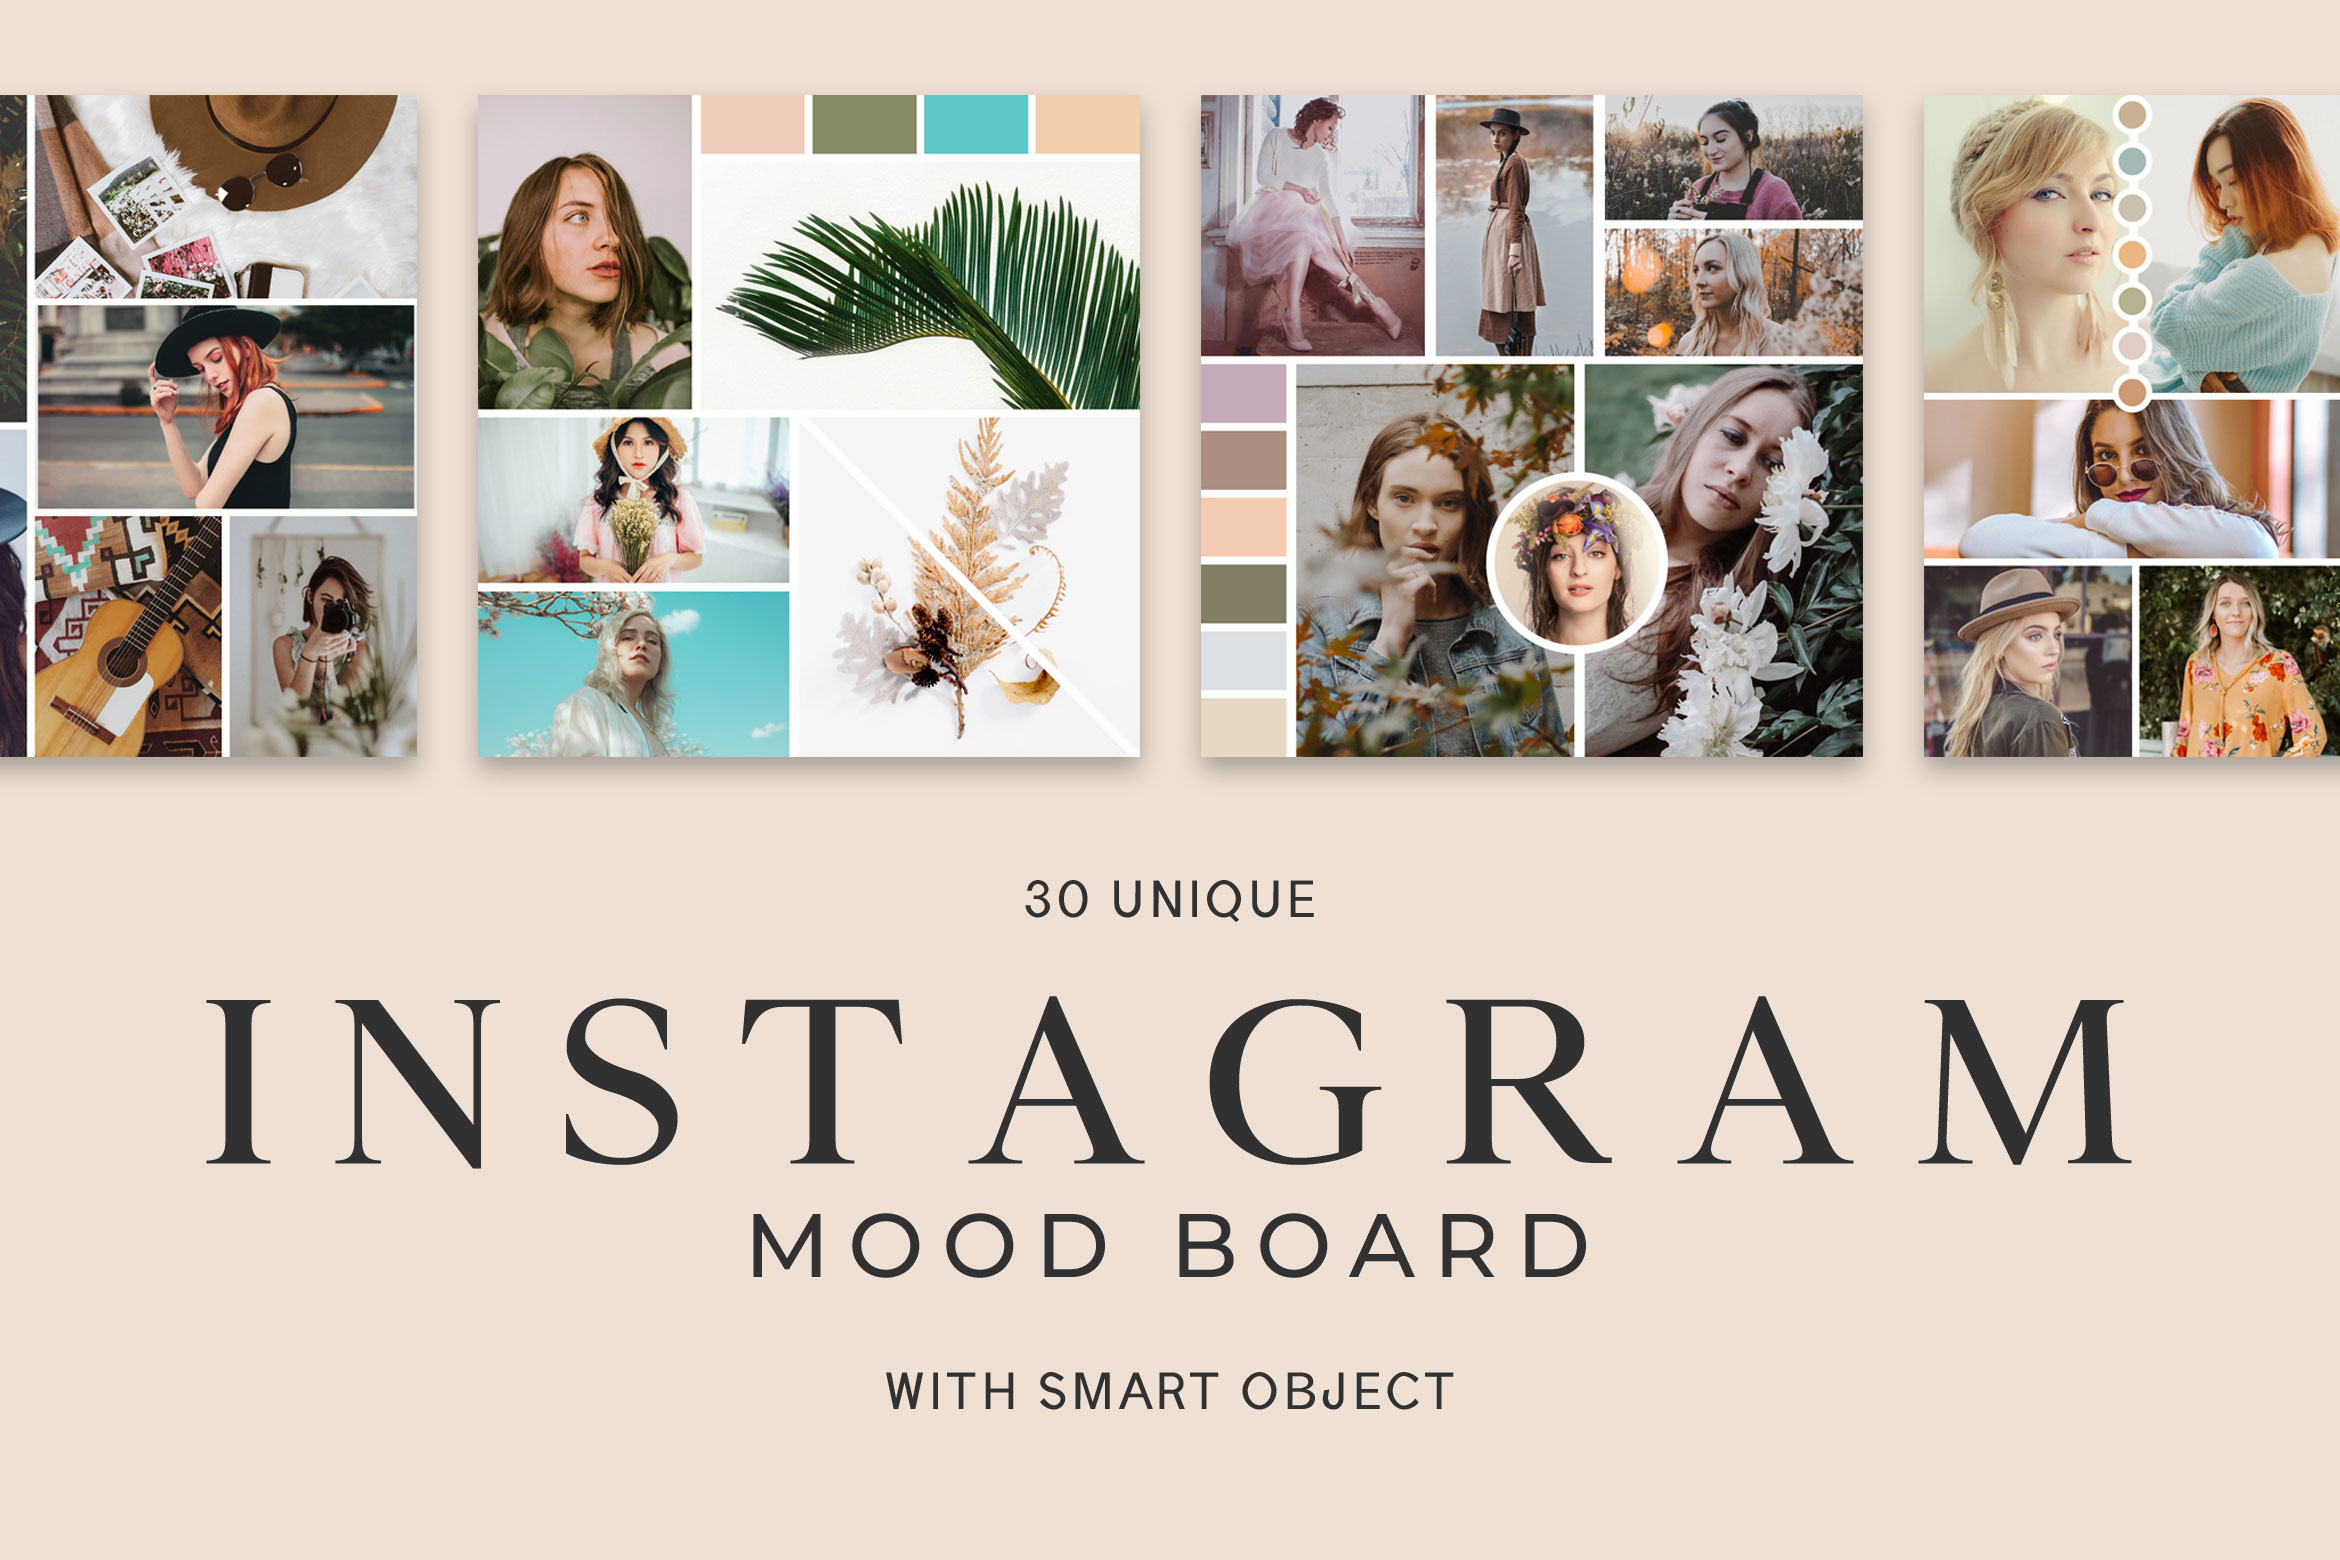 40+ Perfect Instagram Post & Story Templates